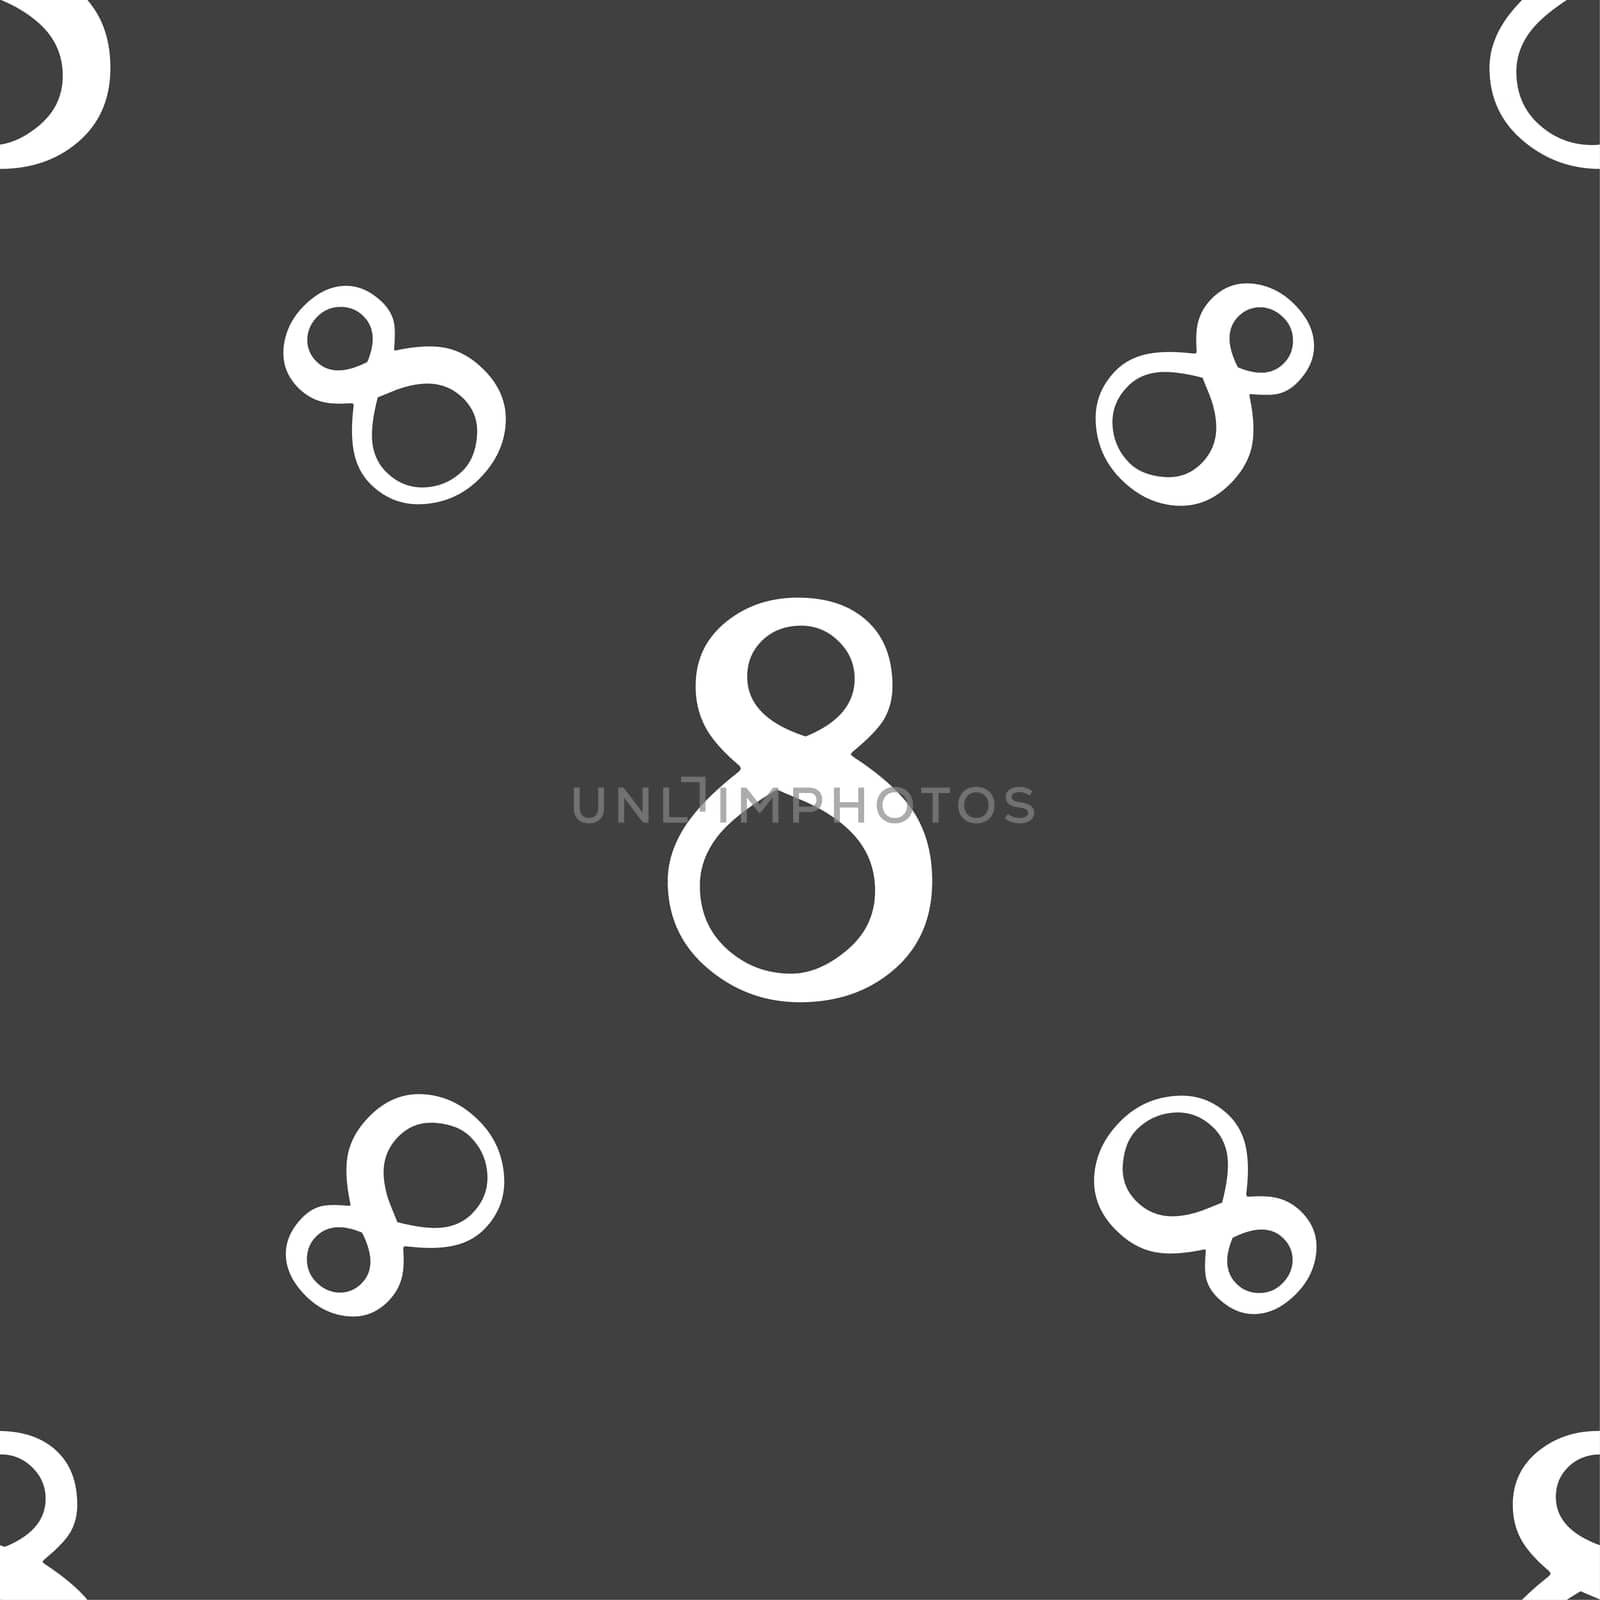 number Eight icon sign. Seamless pattern on a gray background. illustration